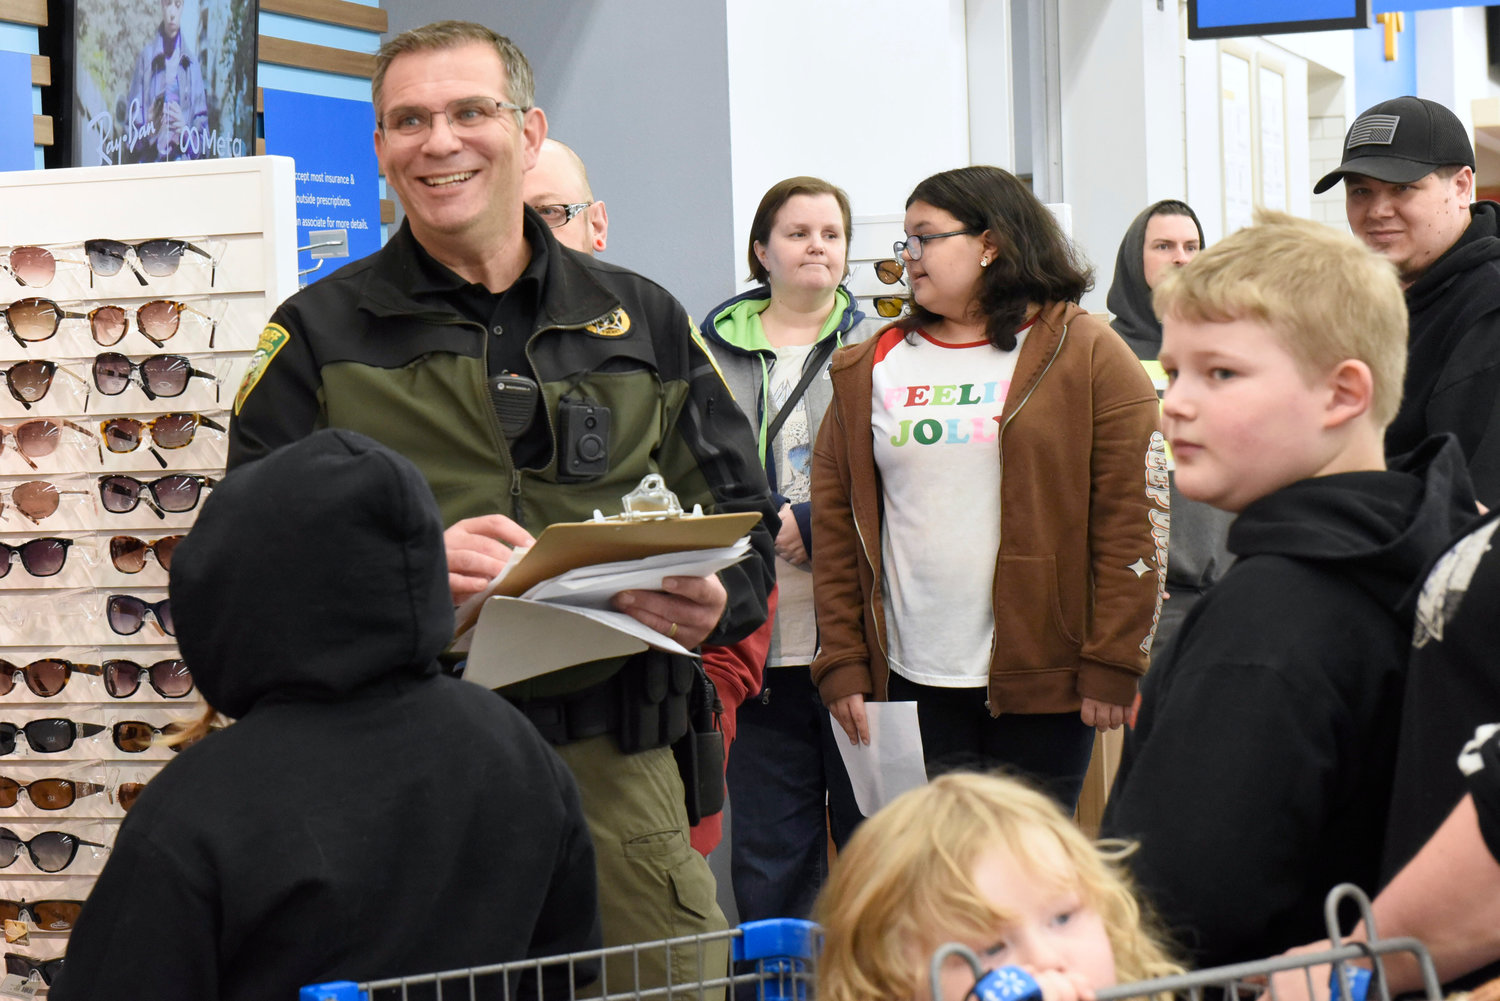 Lewis County Undersheriff Wes Rethwill smiles while interacting with kids participating in the Shop With a Cop event at Chehalis Walmart on Wednesday.